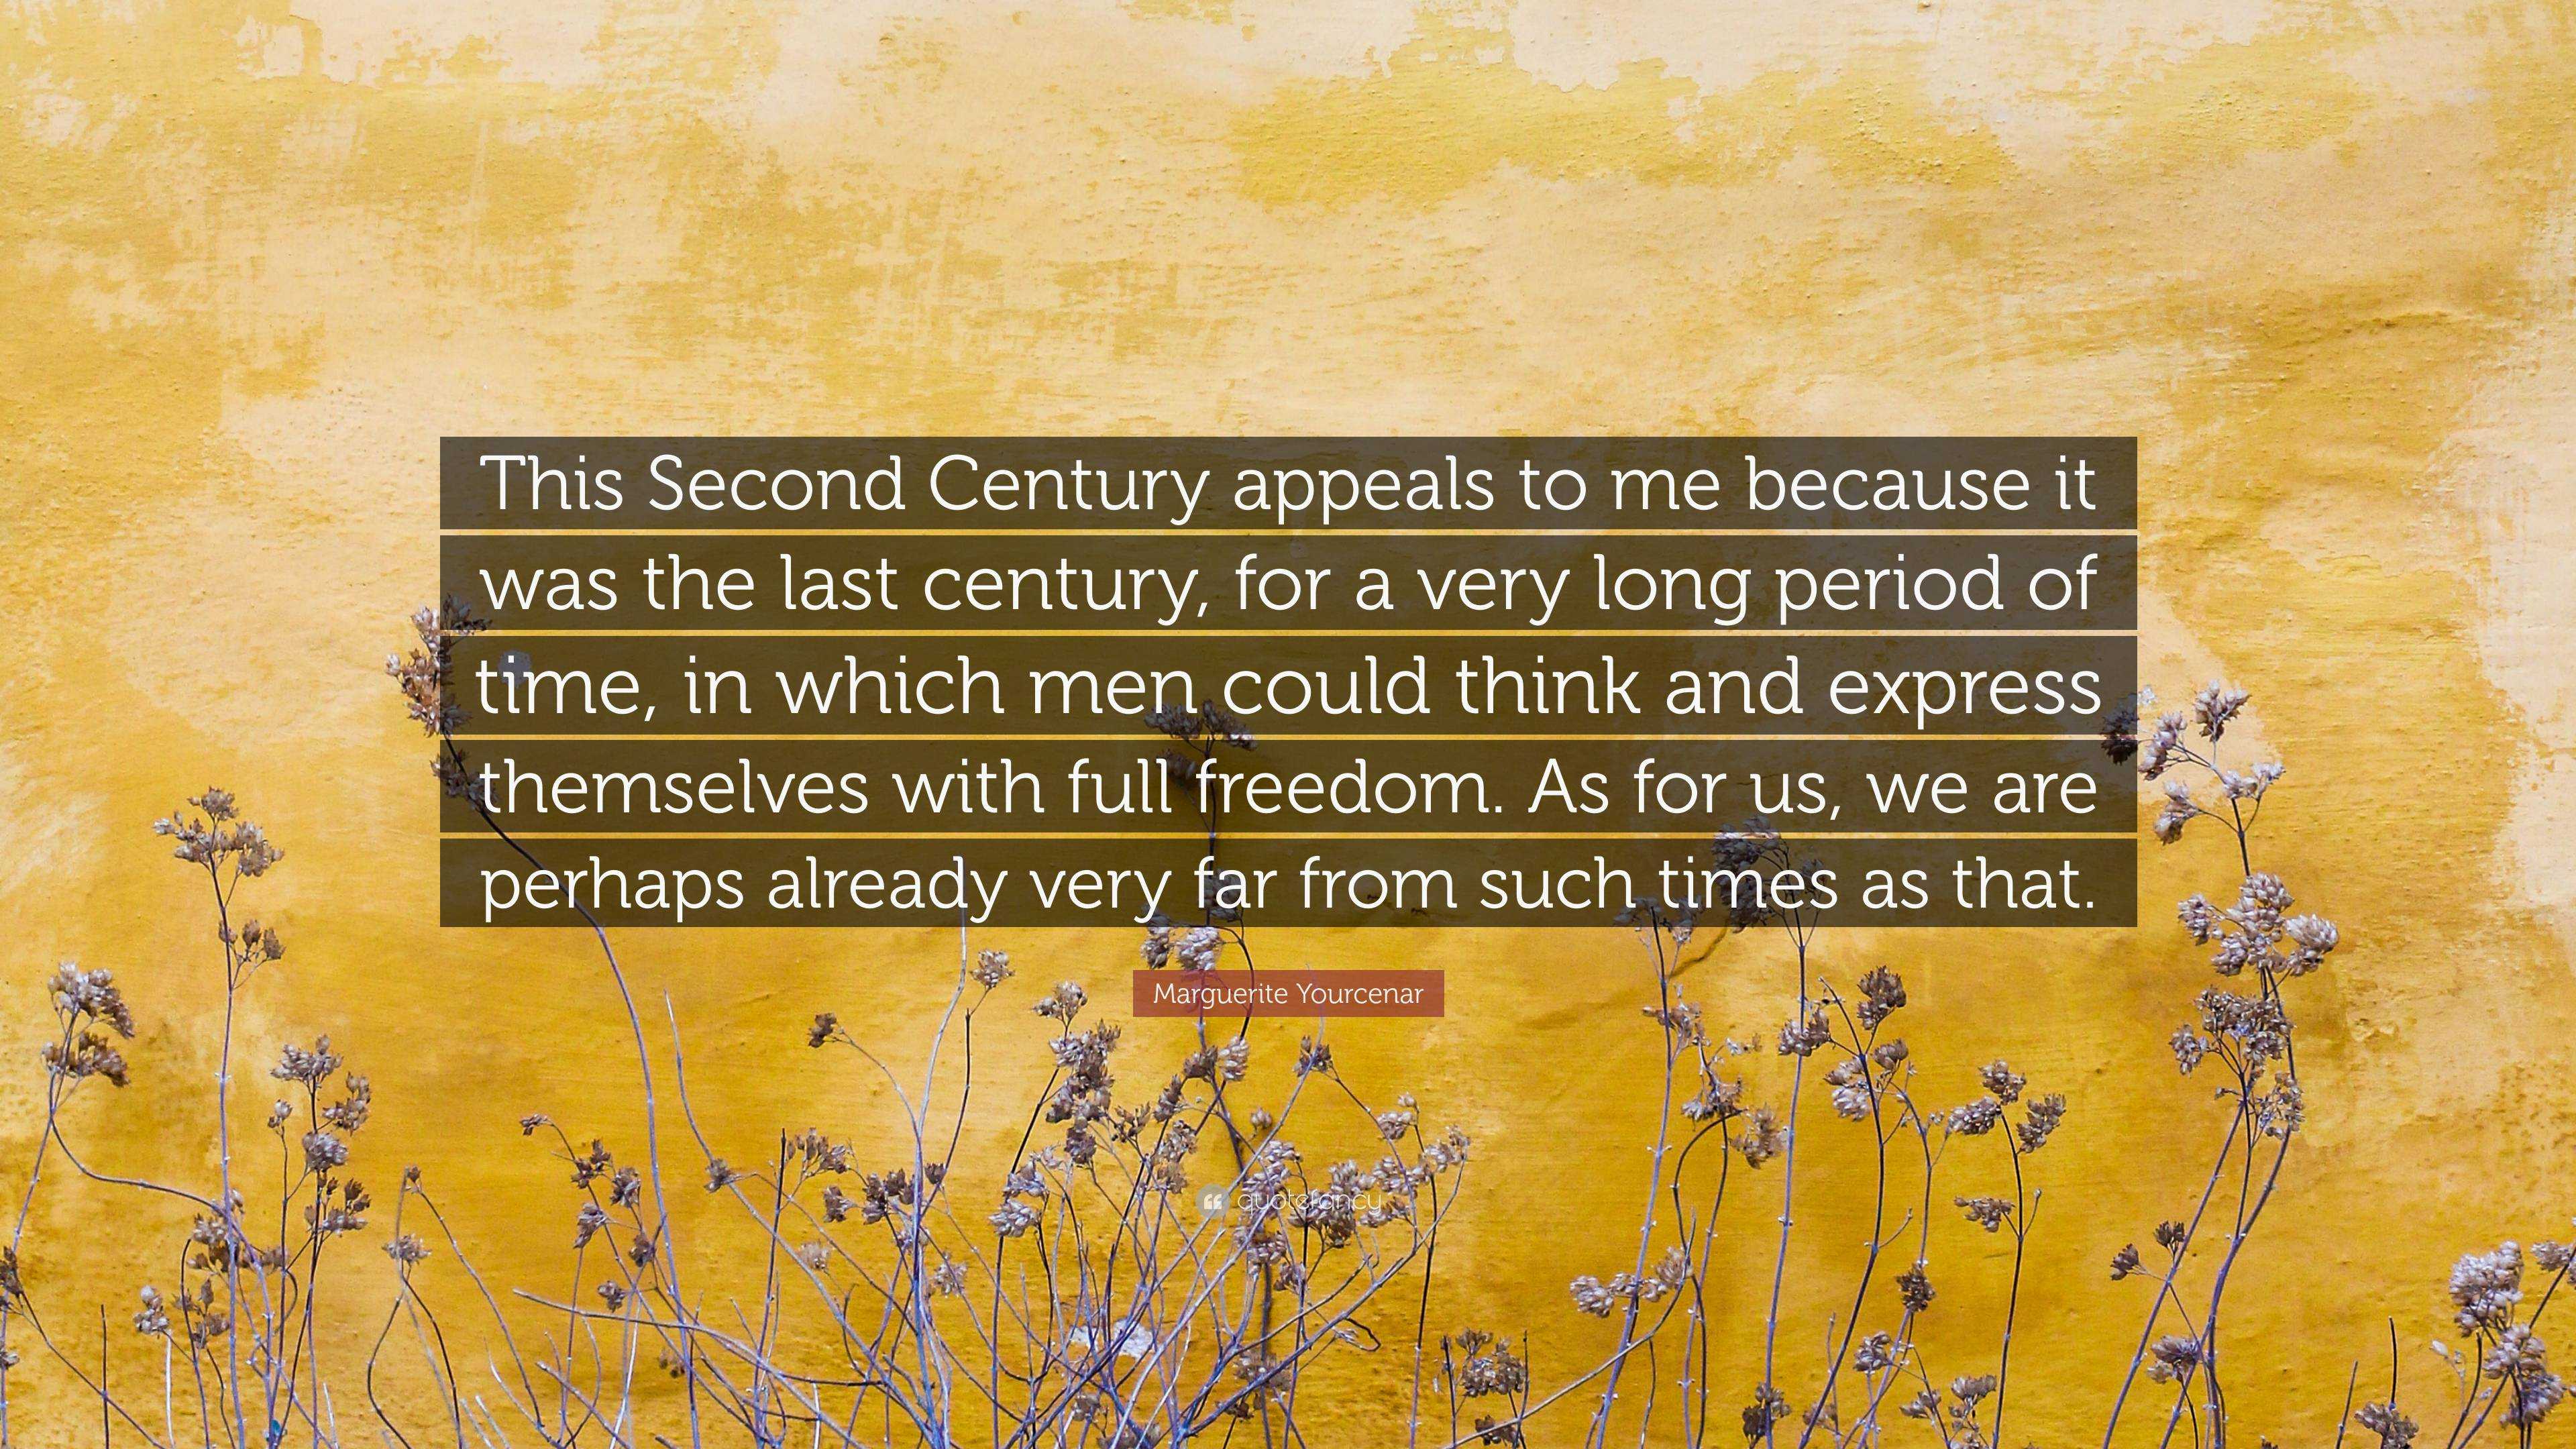 Marguerite Yourcenar Quote “This Second Century appeals to me ...